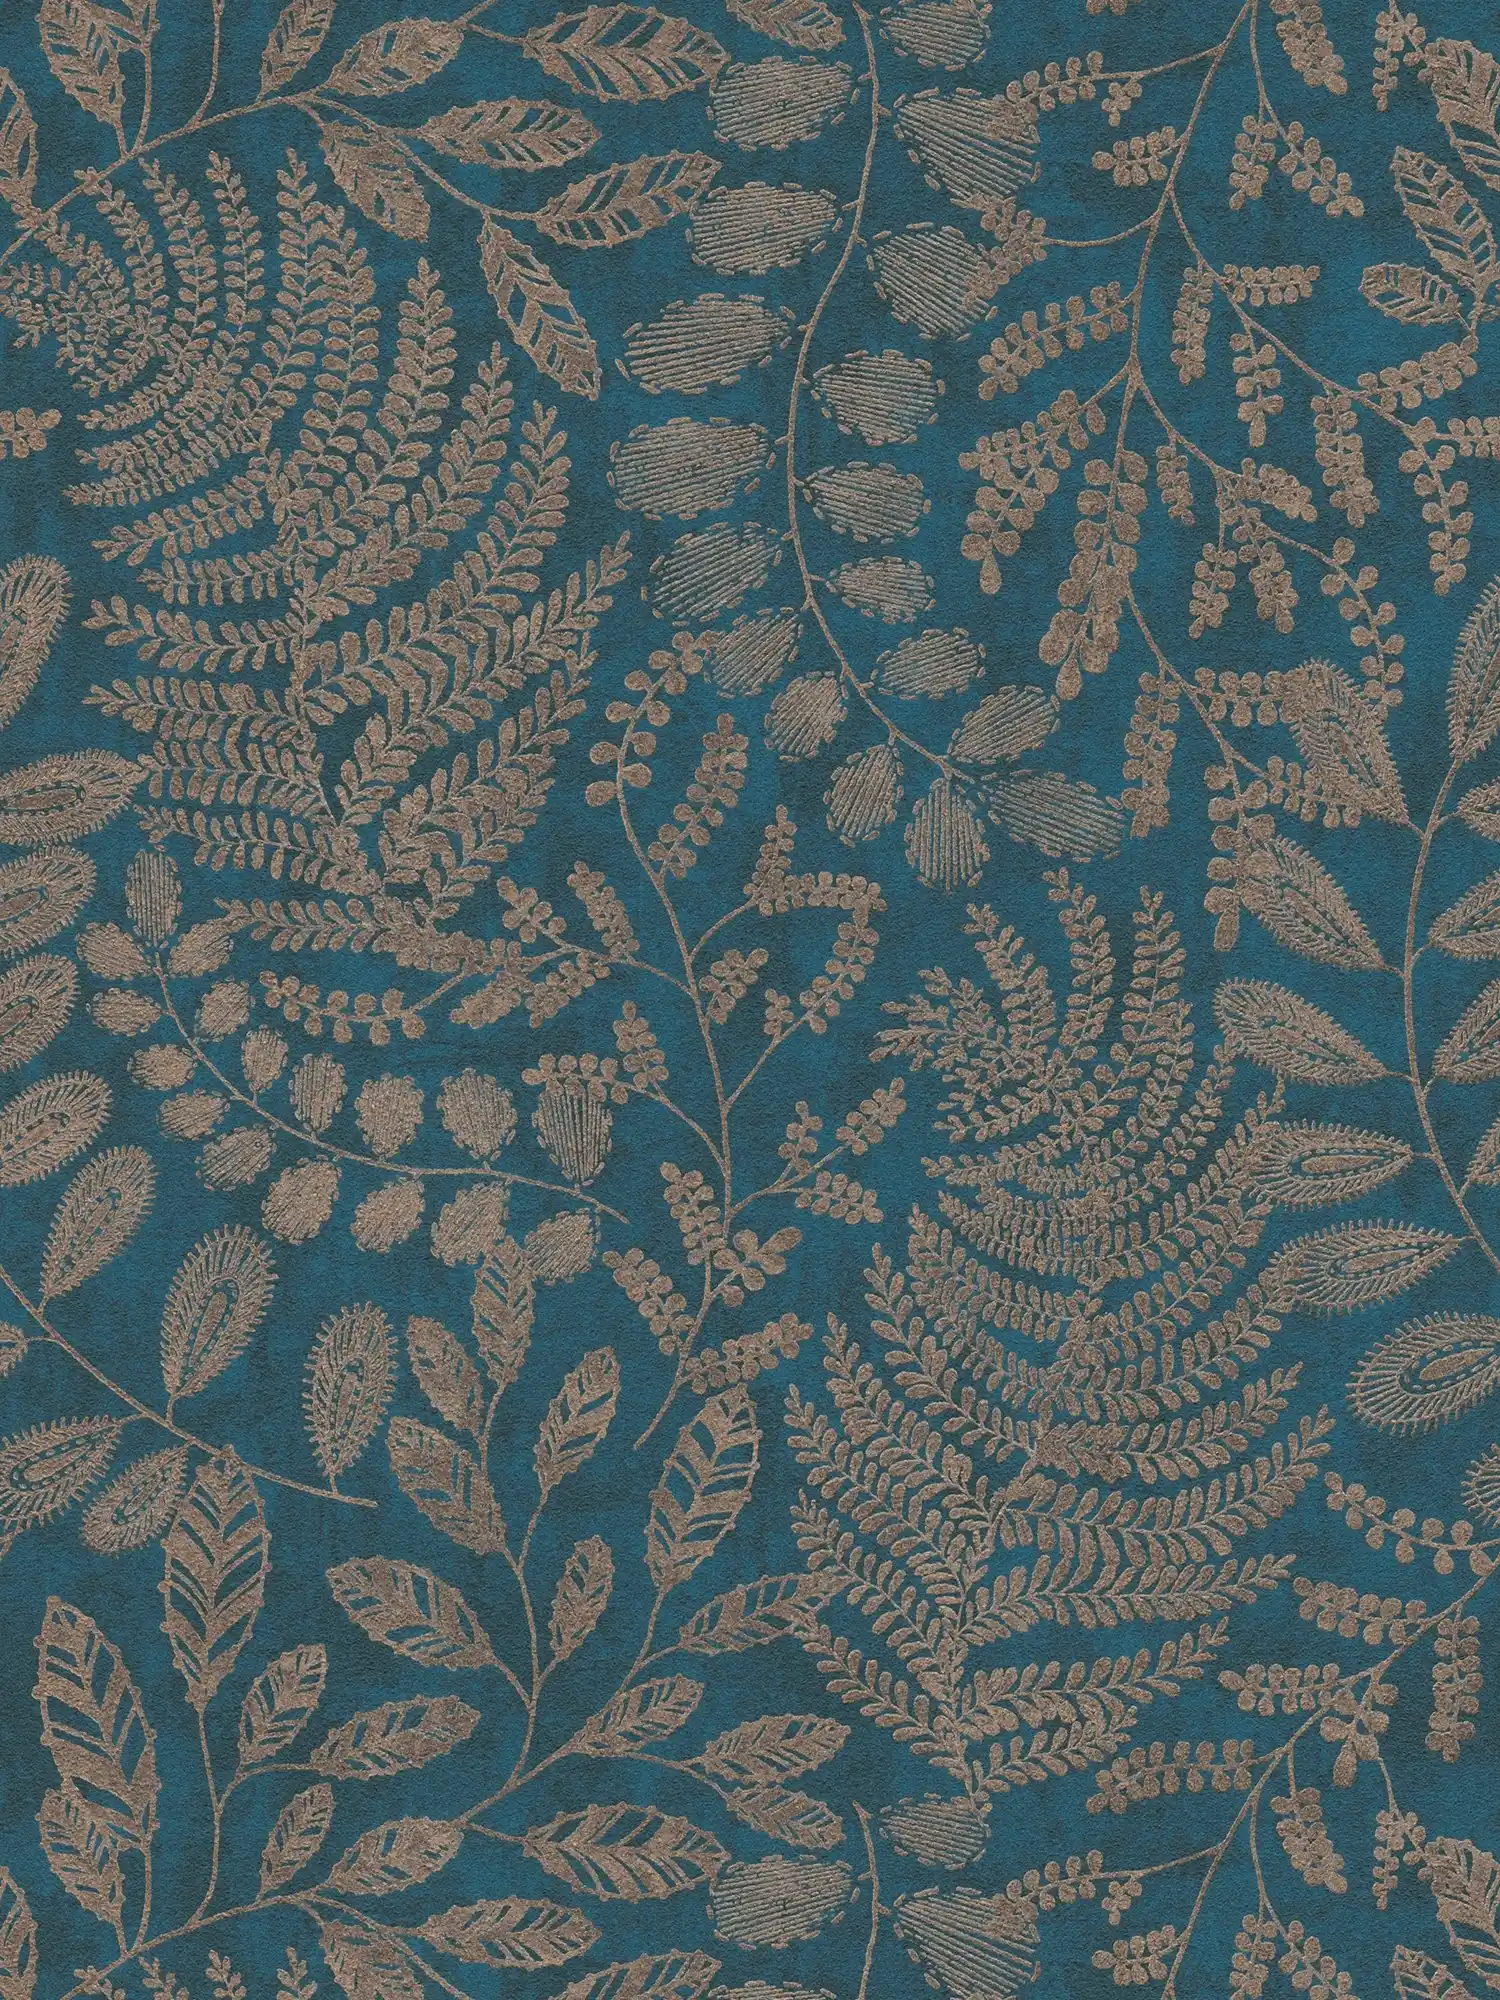         Blue wallpaper with gold design in boho style
    